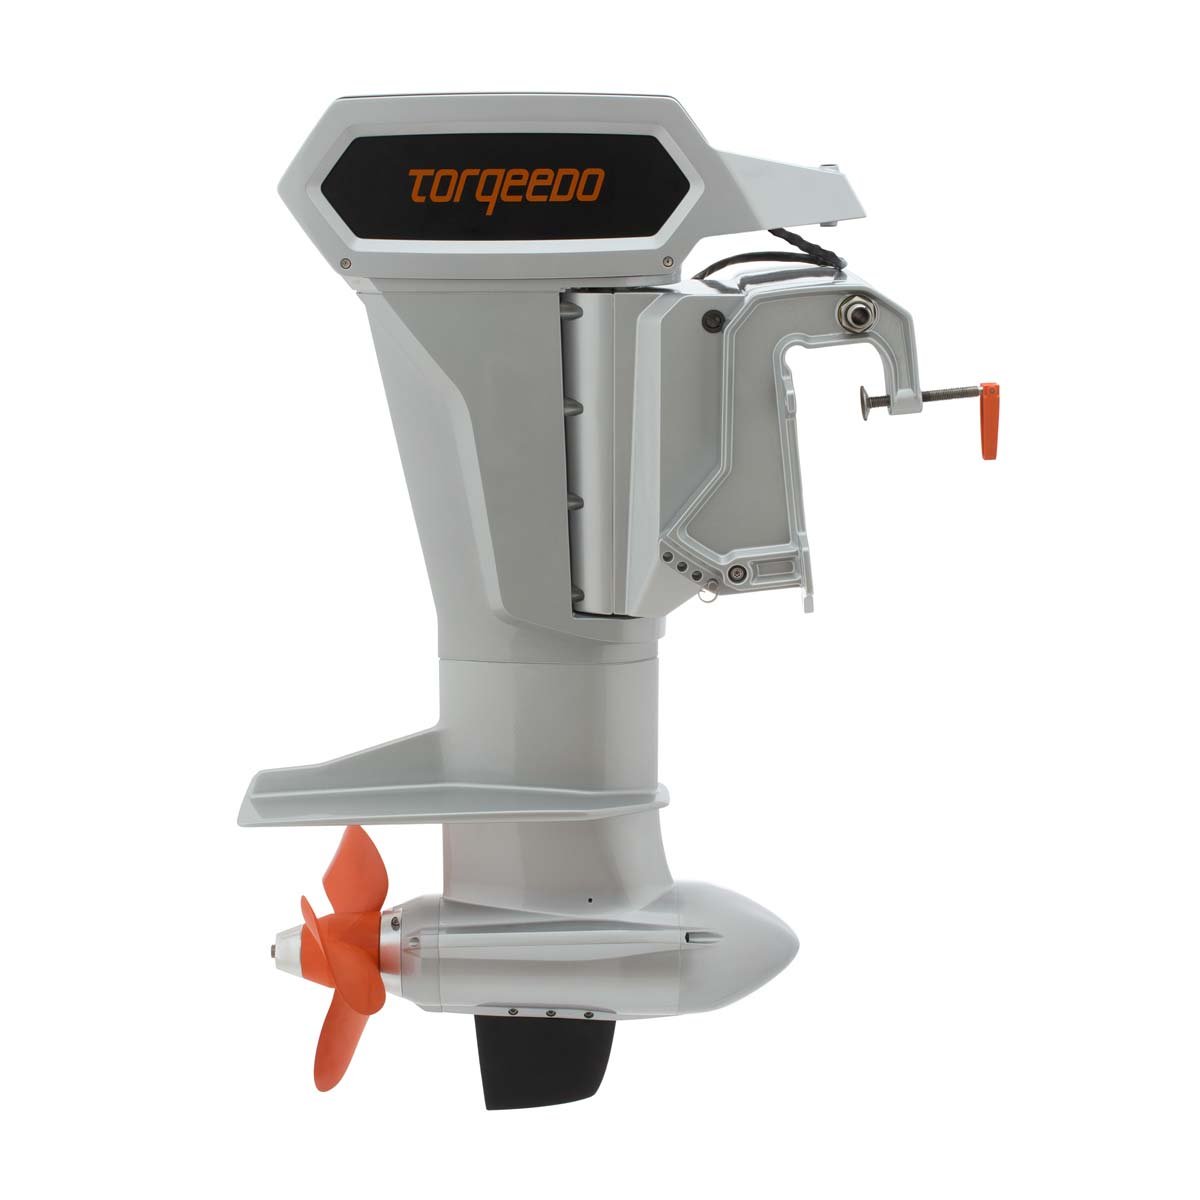 cruise-electric-outboard-120-1200x1200.jpg